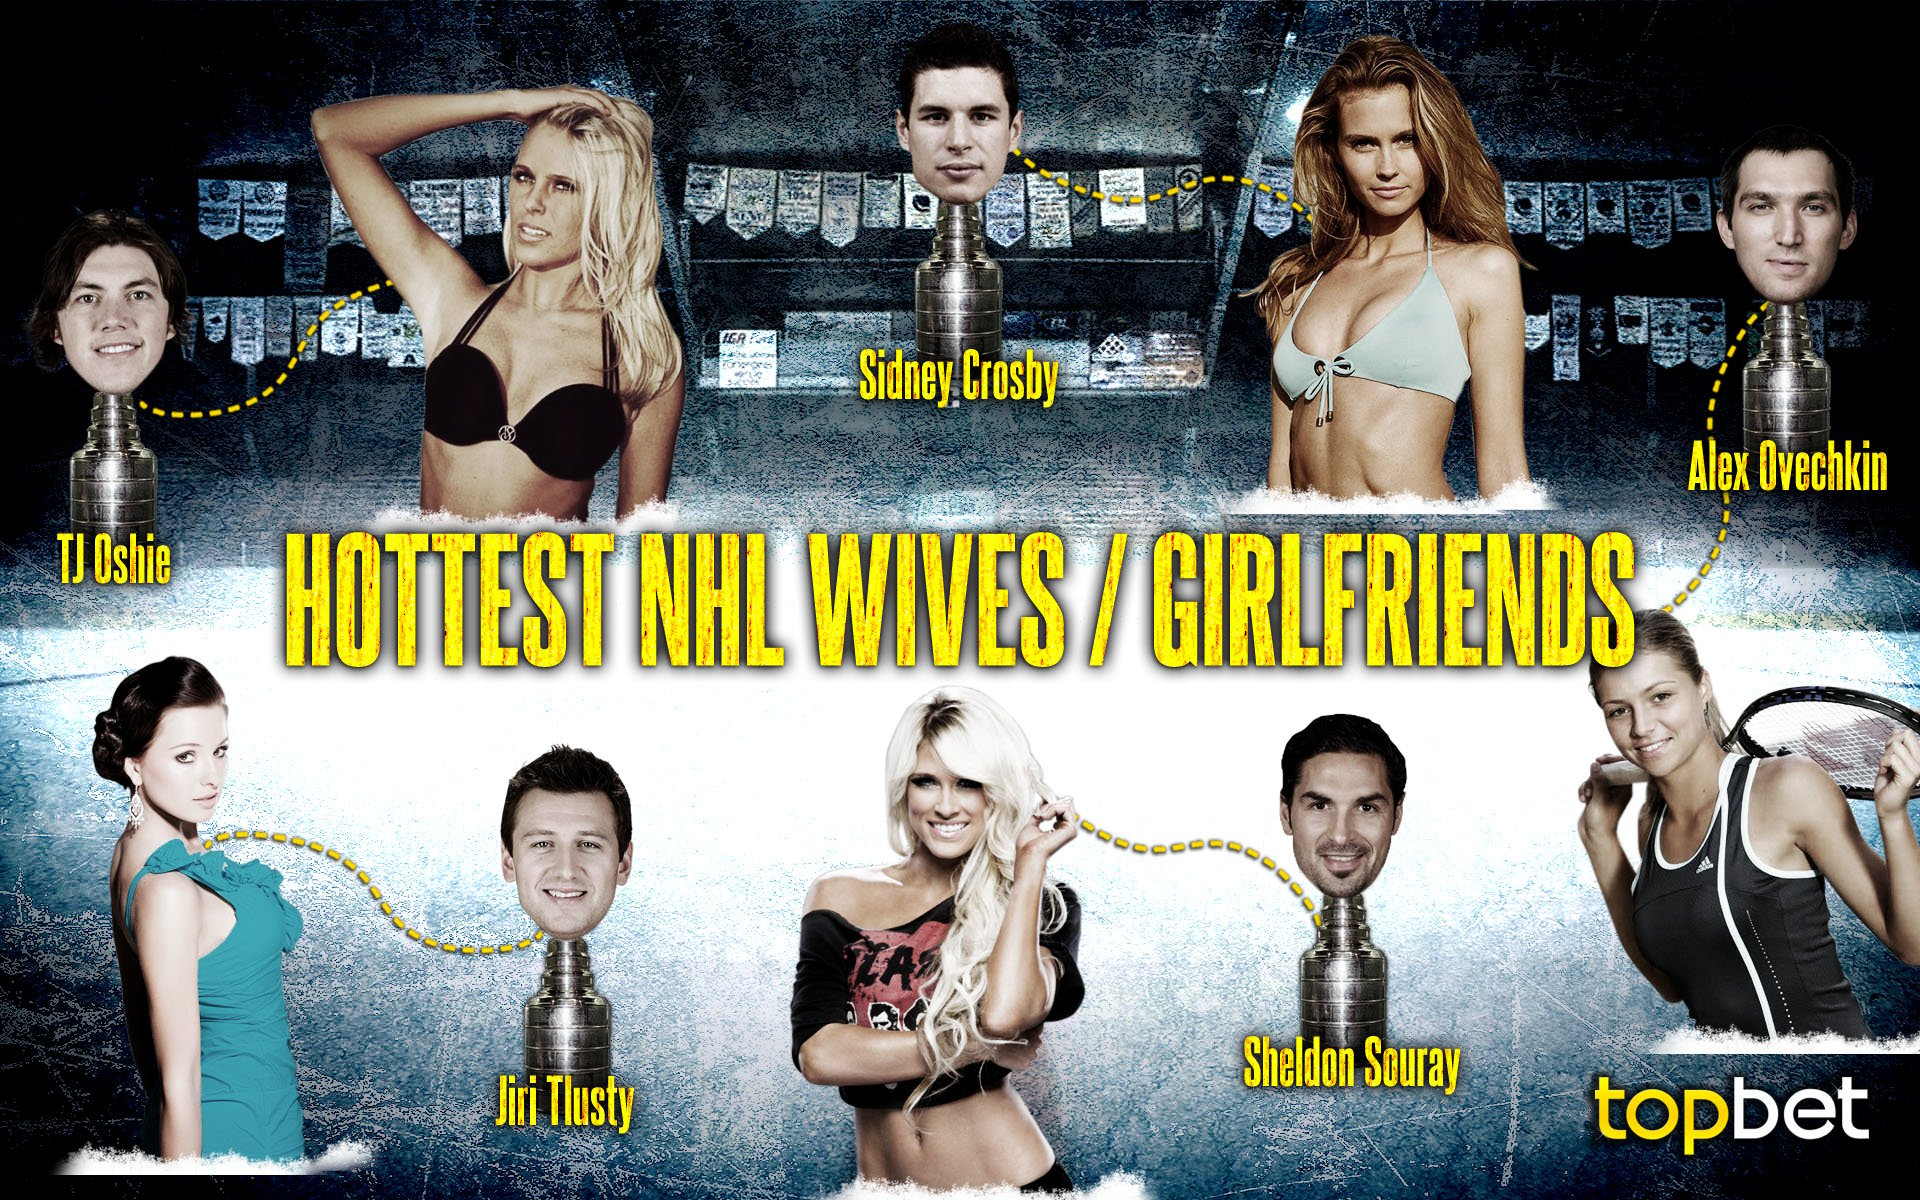 Wives and Girlfriends of NHL players